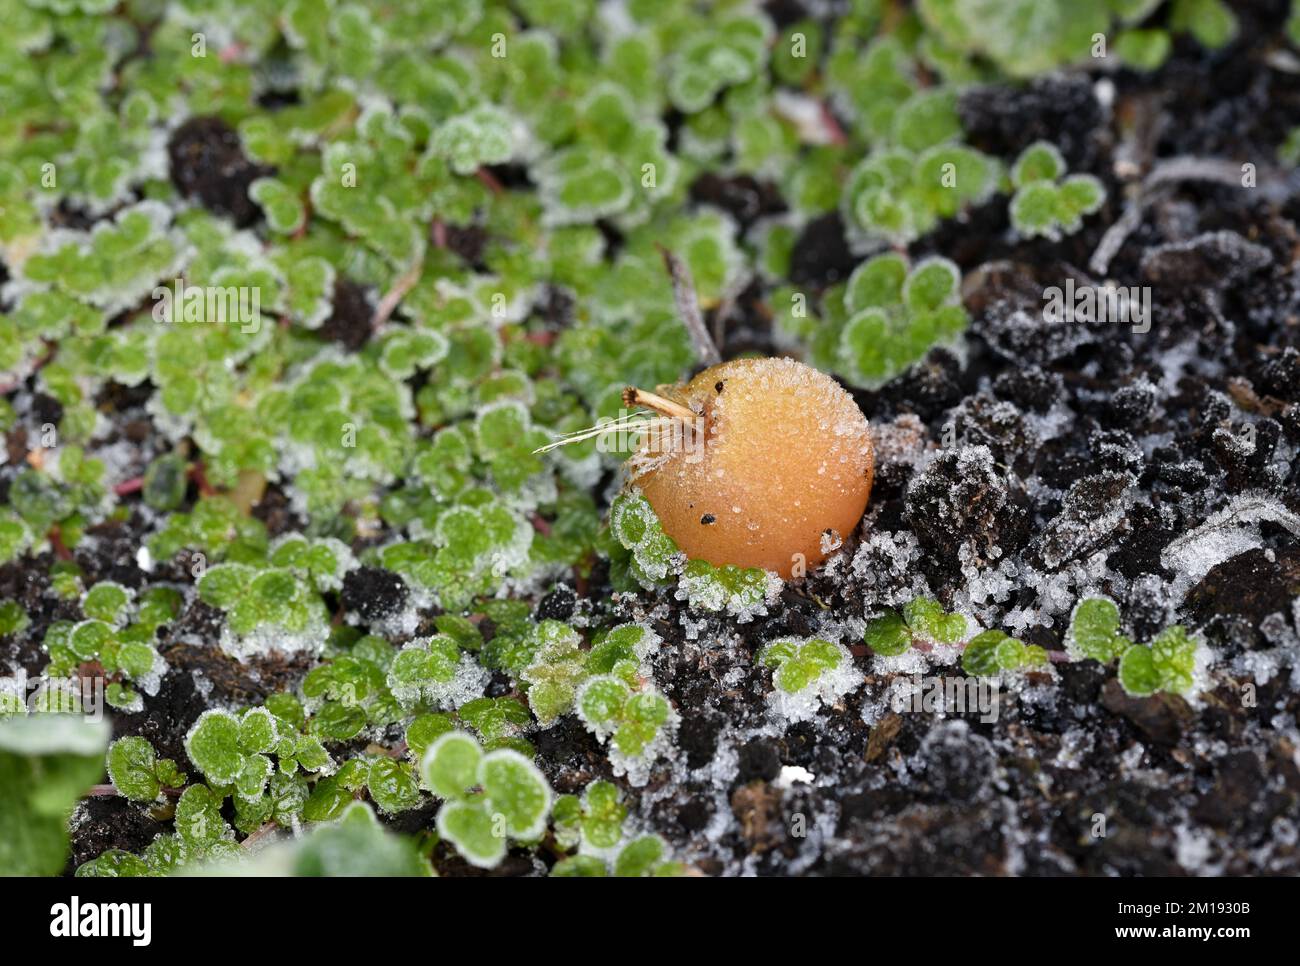 A single tomato lays amongst frozen green leaves on a frosty winter morning Stock Photo